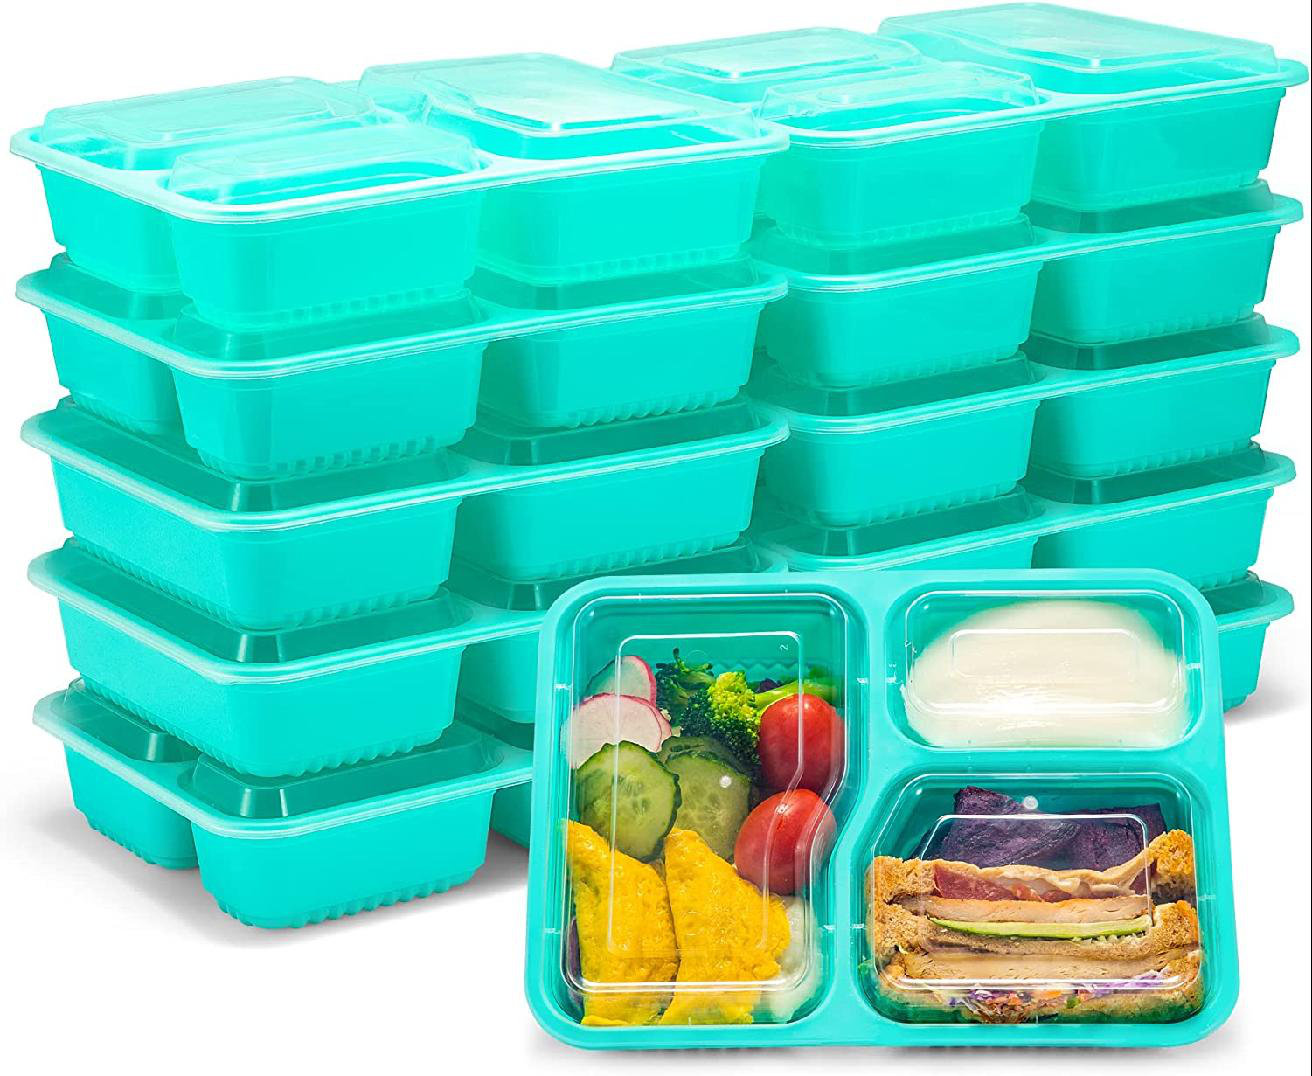 FreshWorks® Food Storage Containers